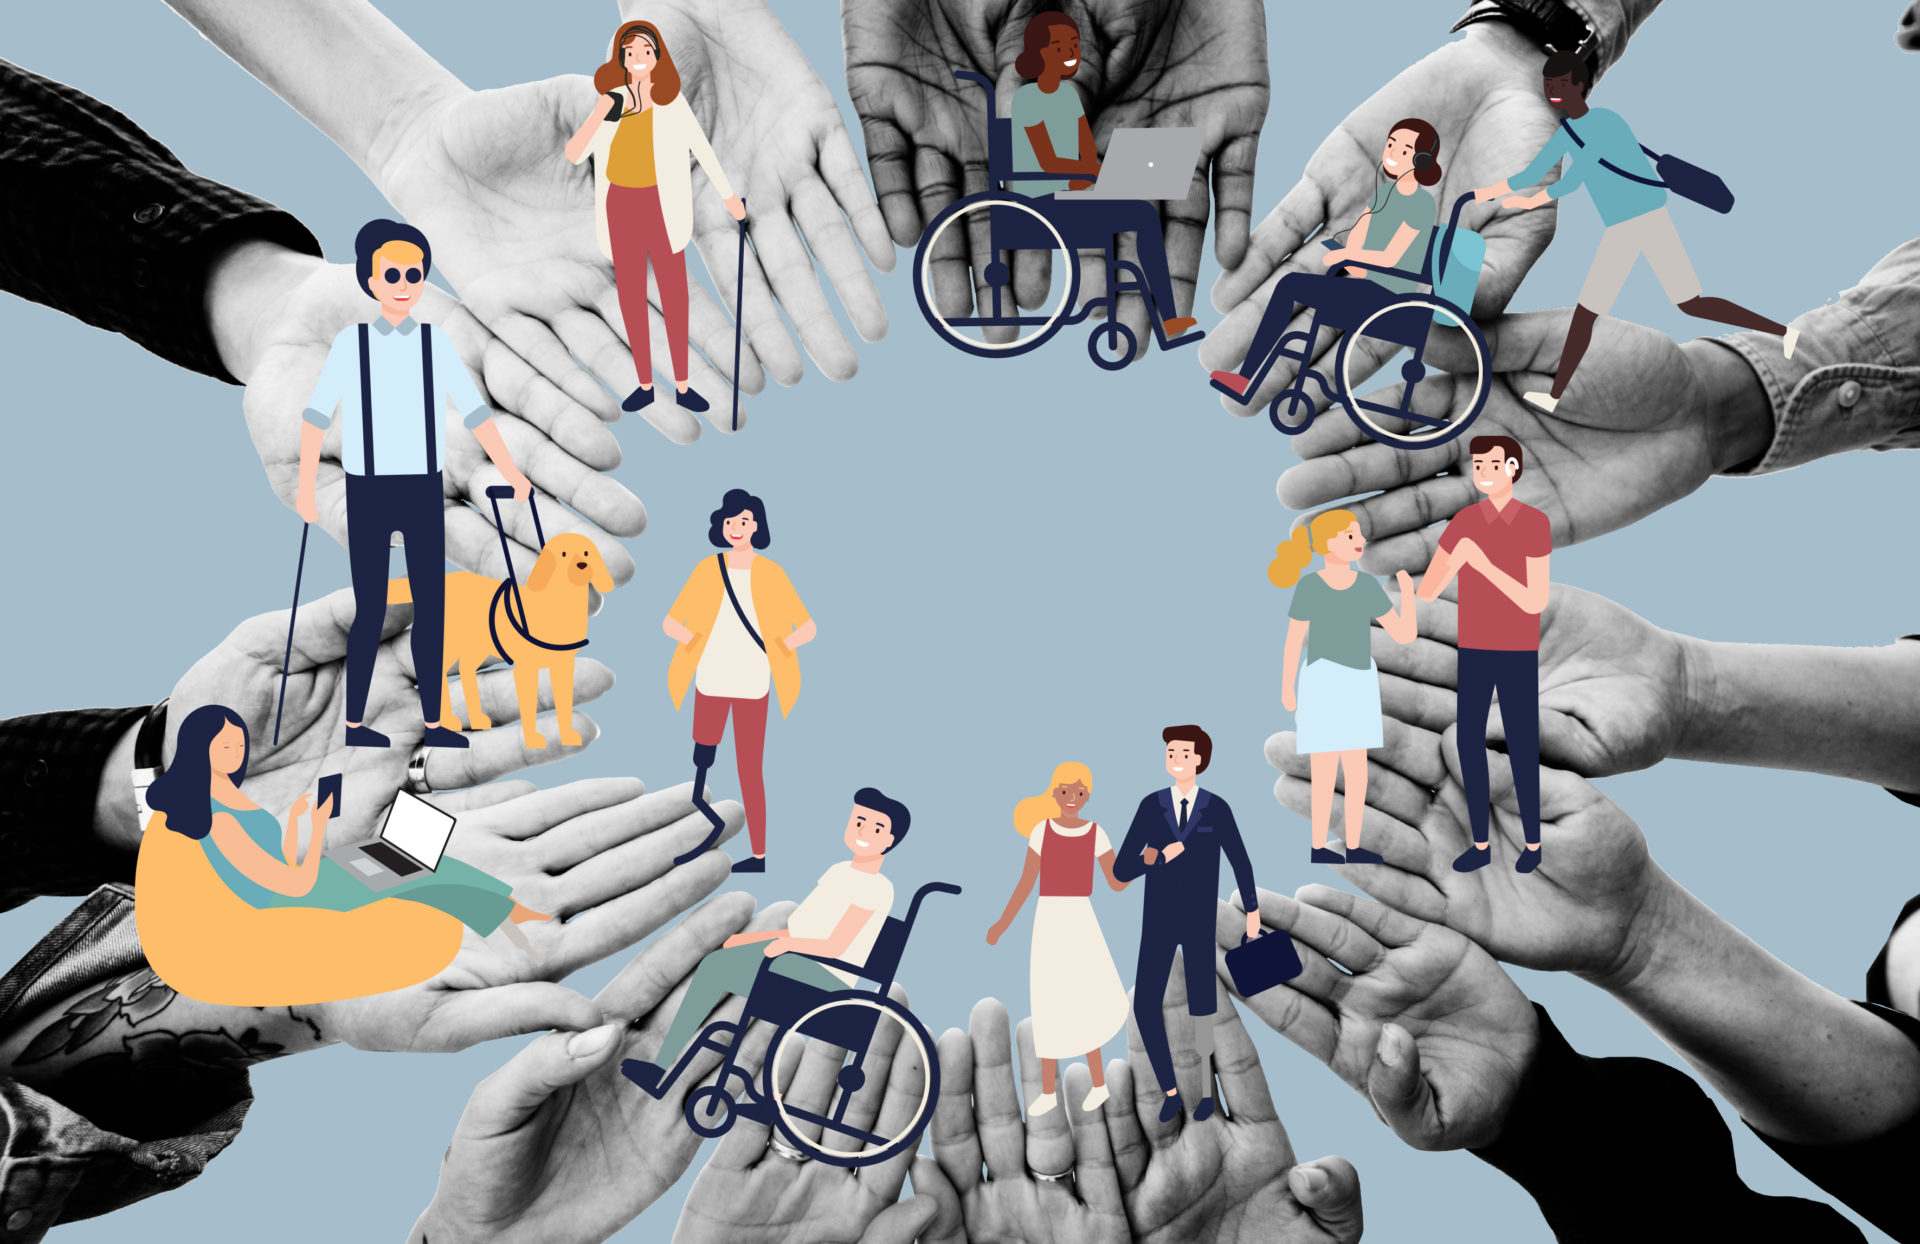 A photograph of a circle of hands with graphics of people smiling together. Some people are using wheelchairs, others have guide dogs and hearing aids.